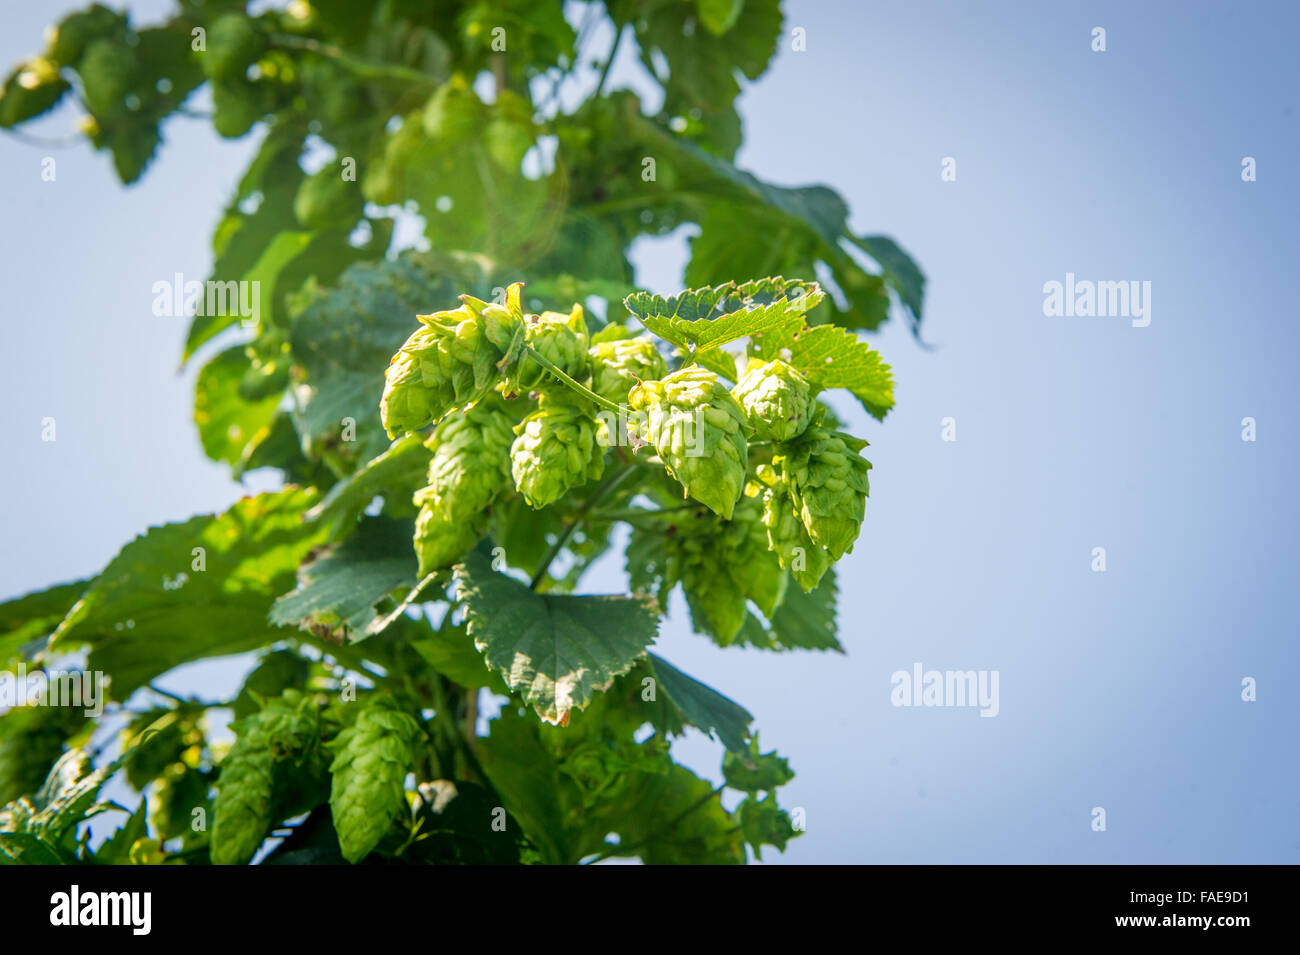 Beer hops being grown on a vine Stock Photo